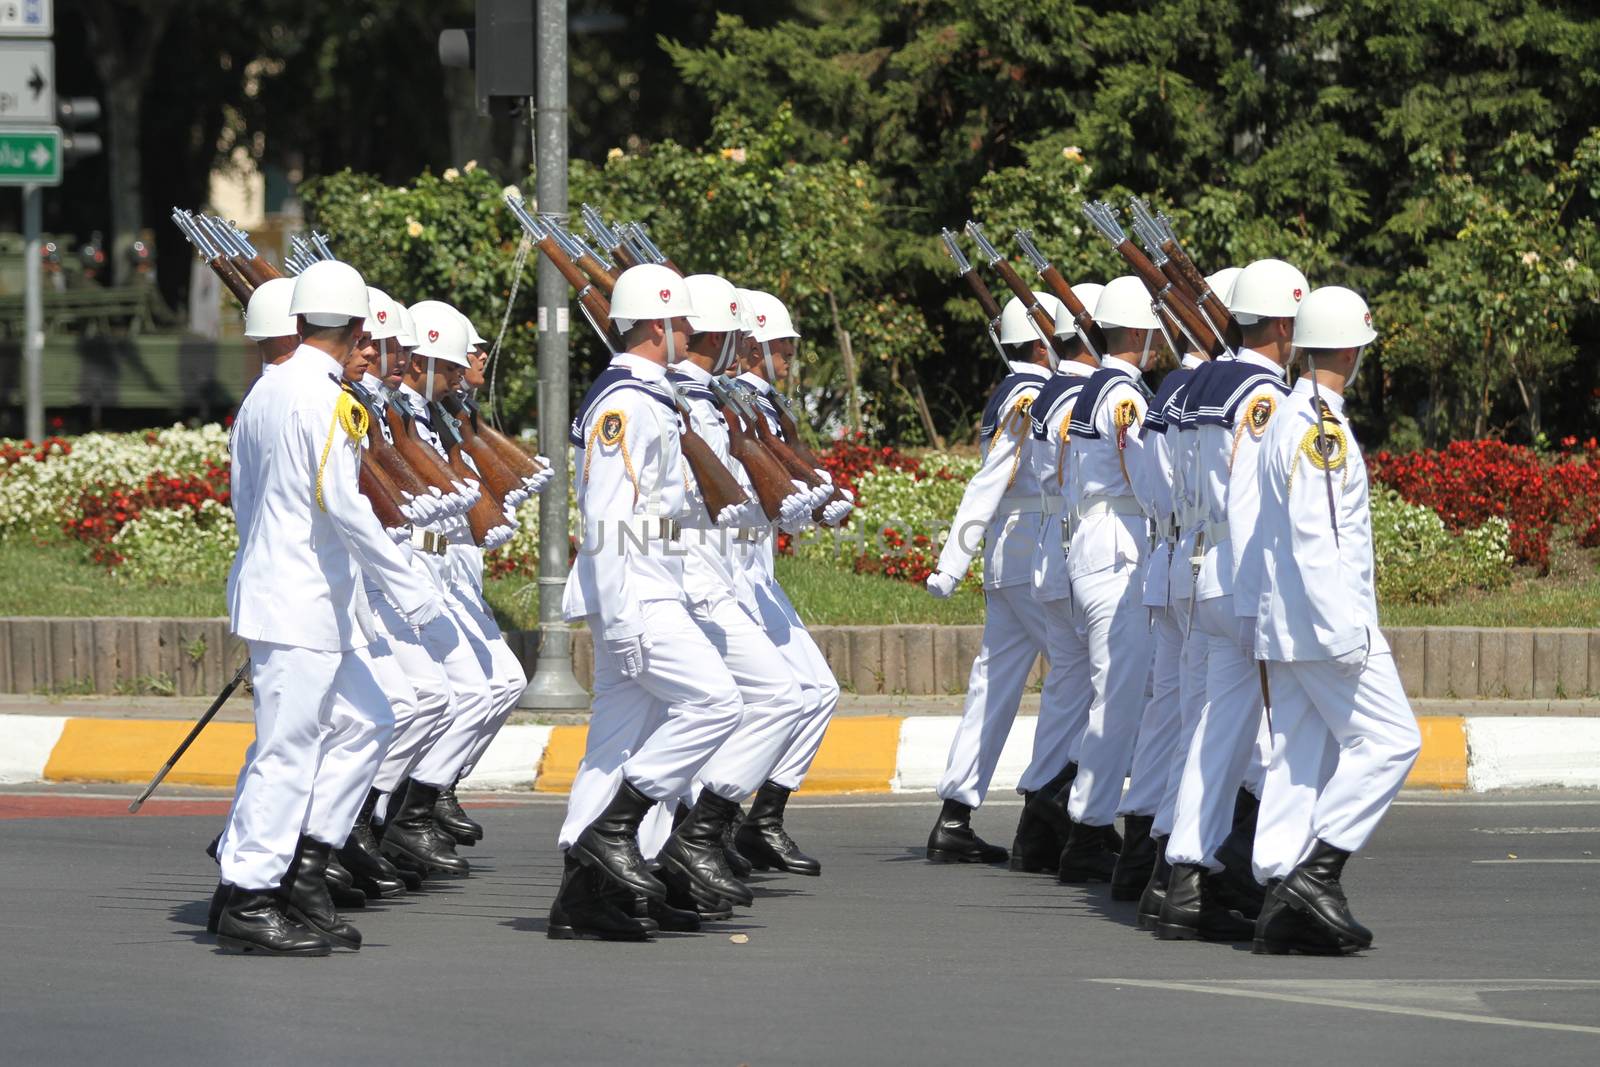 ISTANBUL, TURKEY - AUGUST 30, 2015: Sailors march during 93th anniversary of 30 August Turkish Victory Day parade on Vatan Avenue